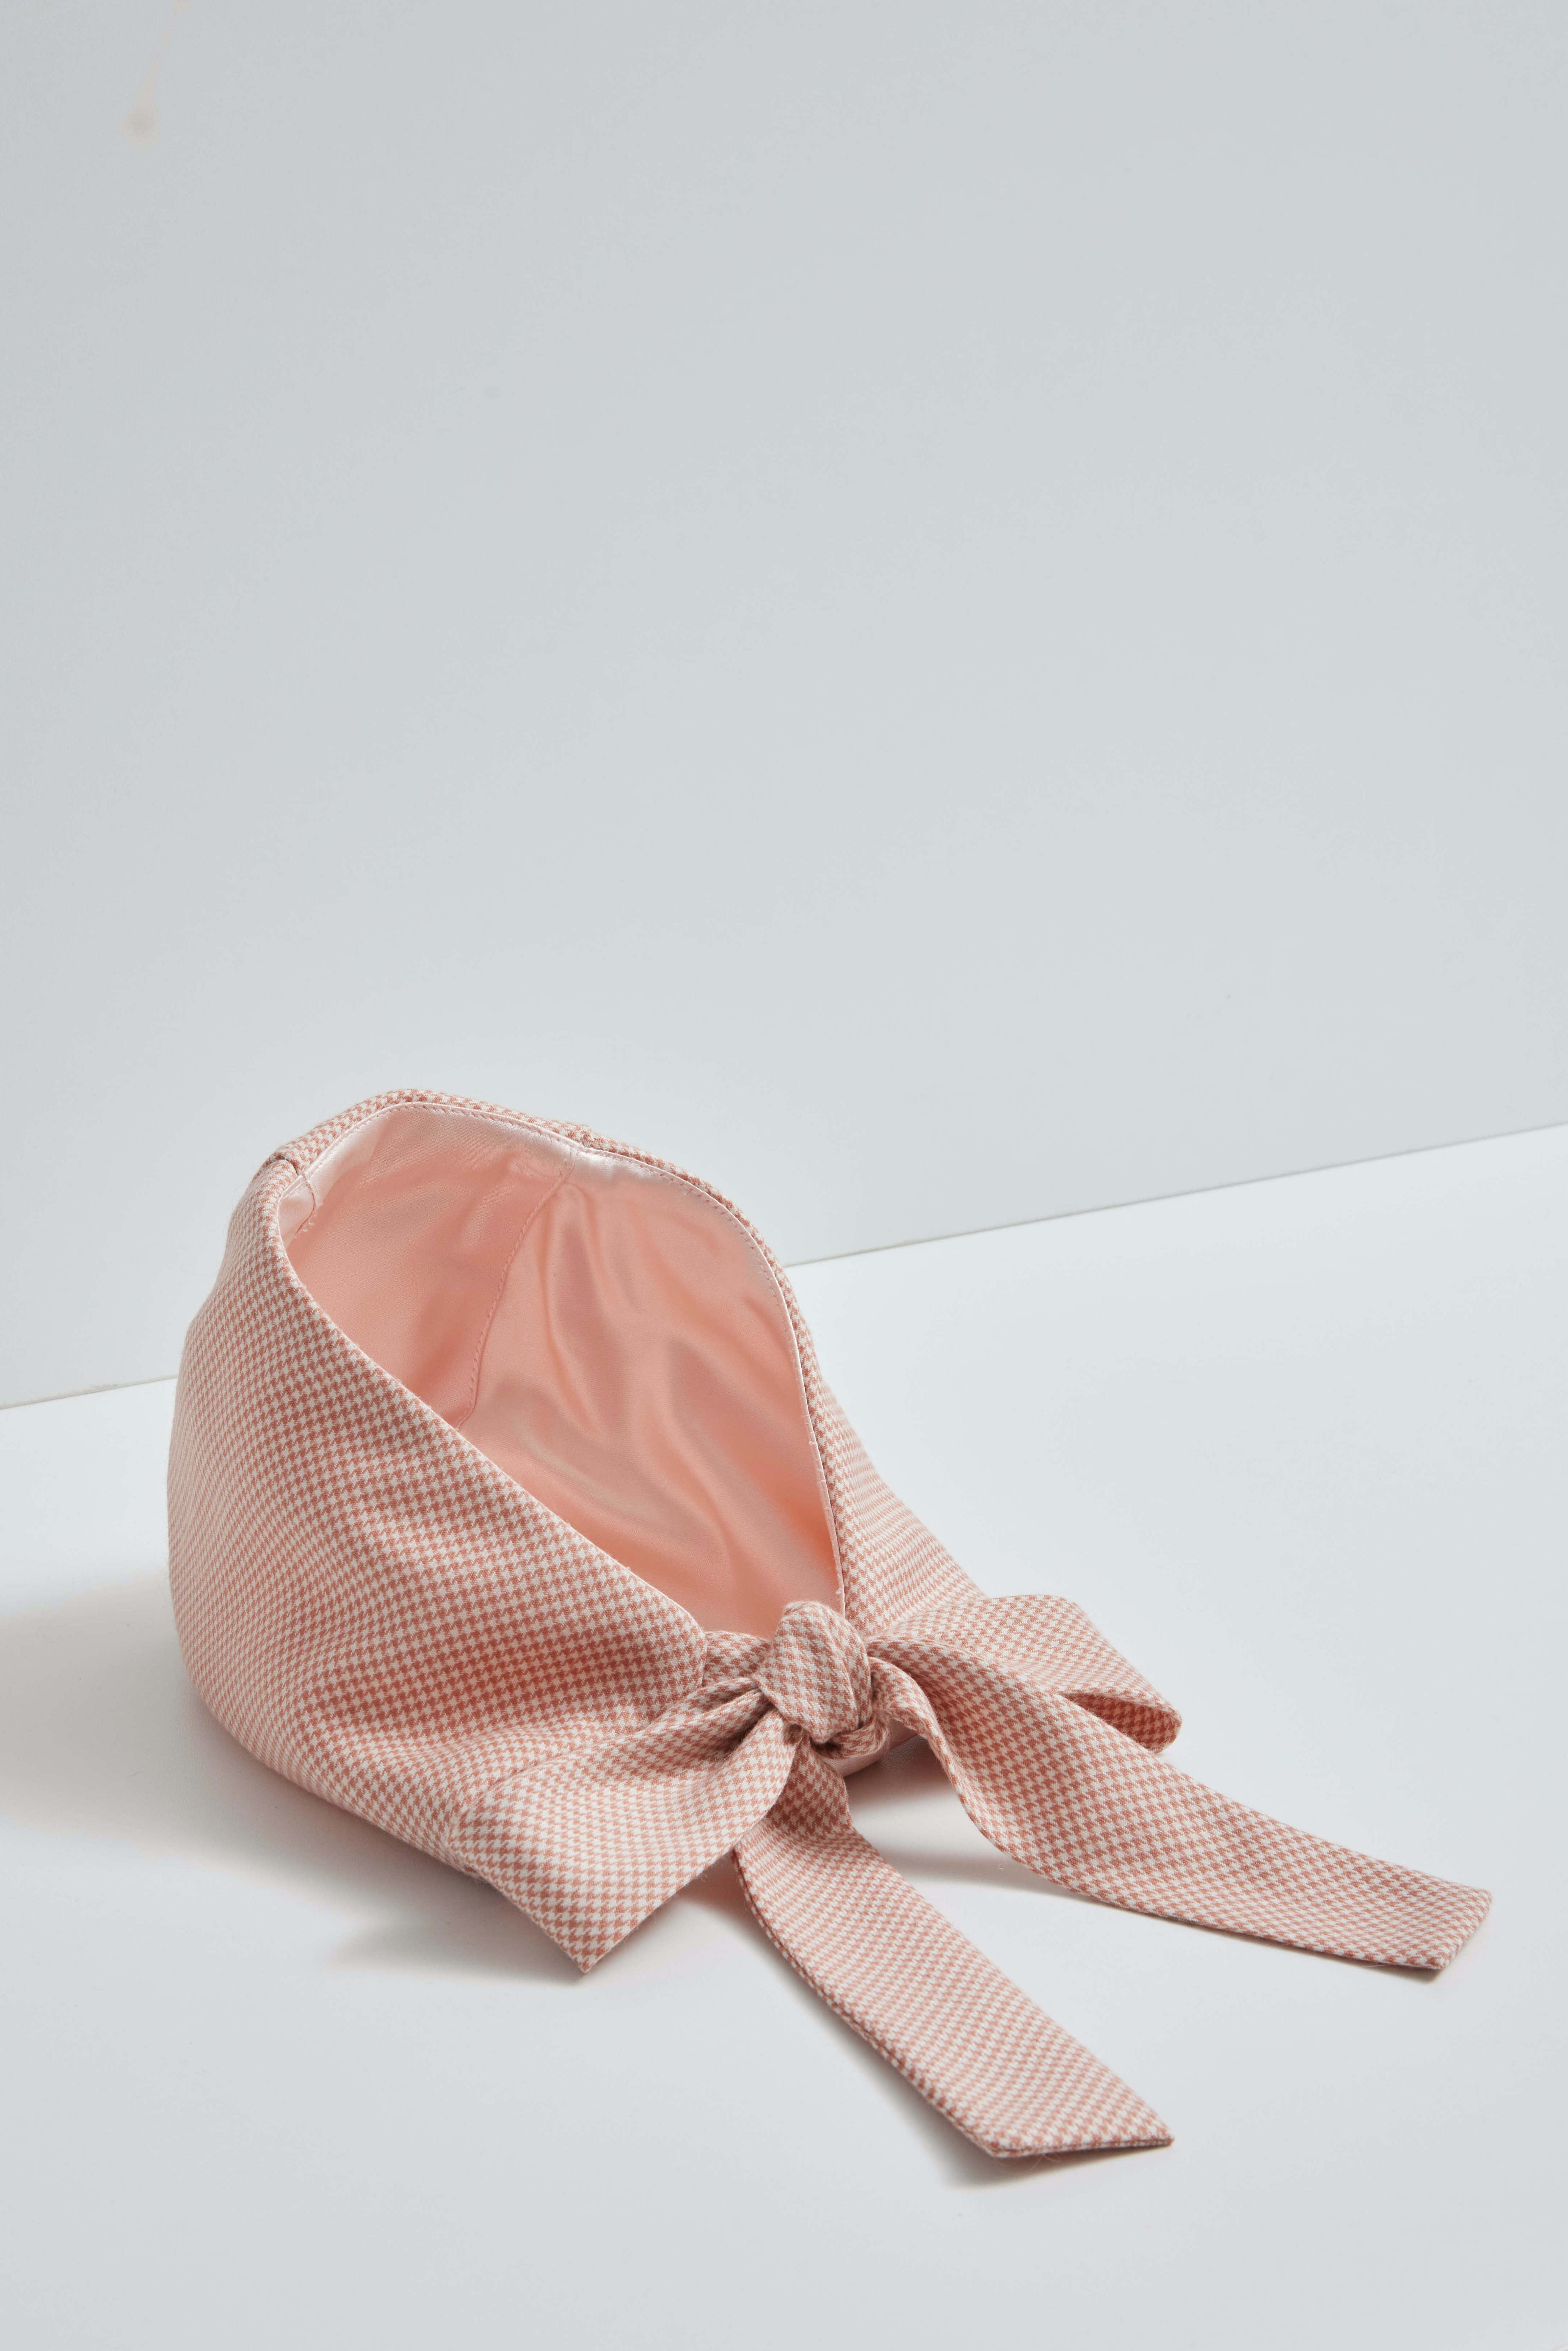 Shepherd's daughter bonnet - Pink and white houndstooth wool